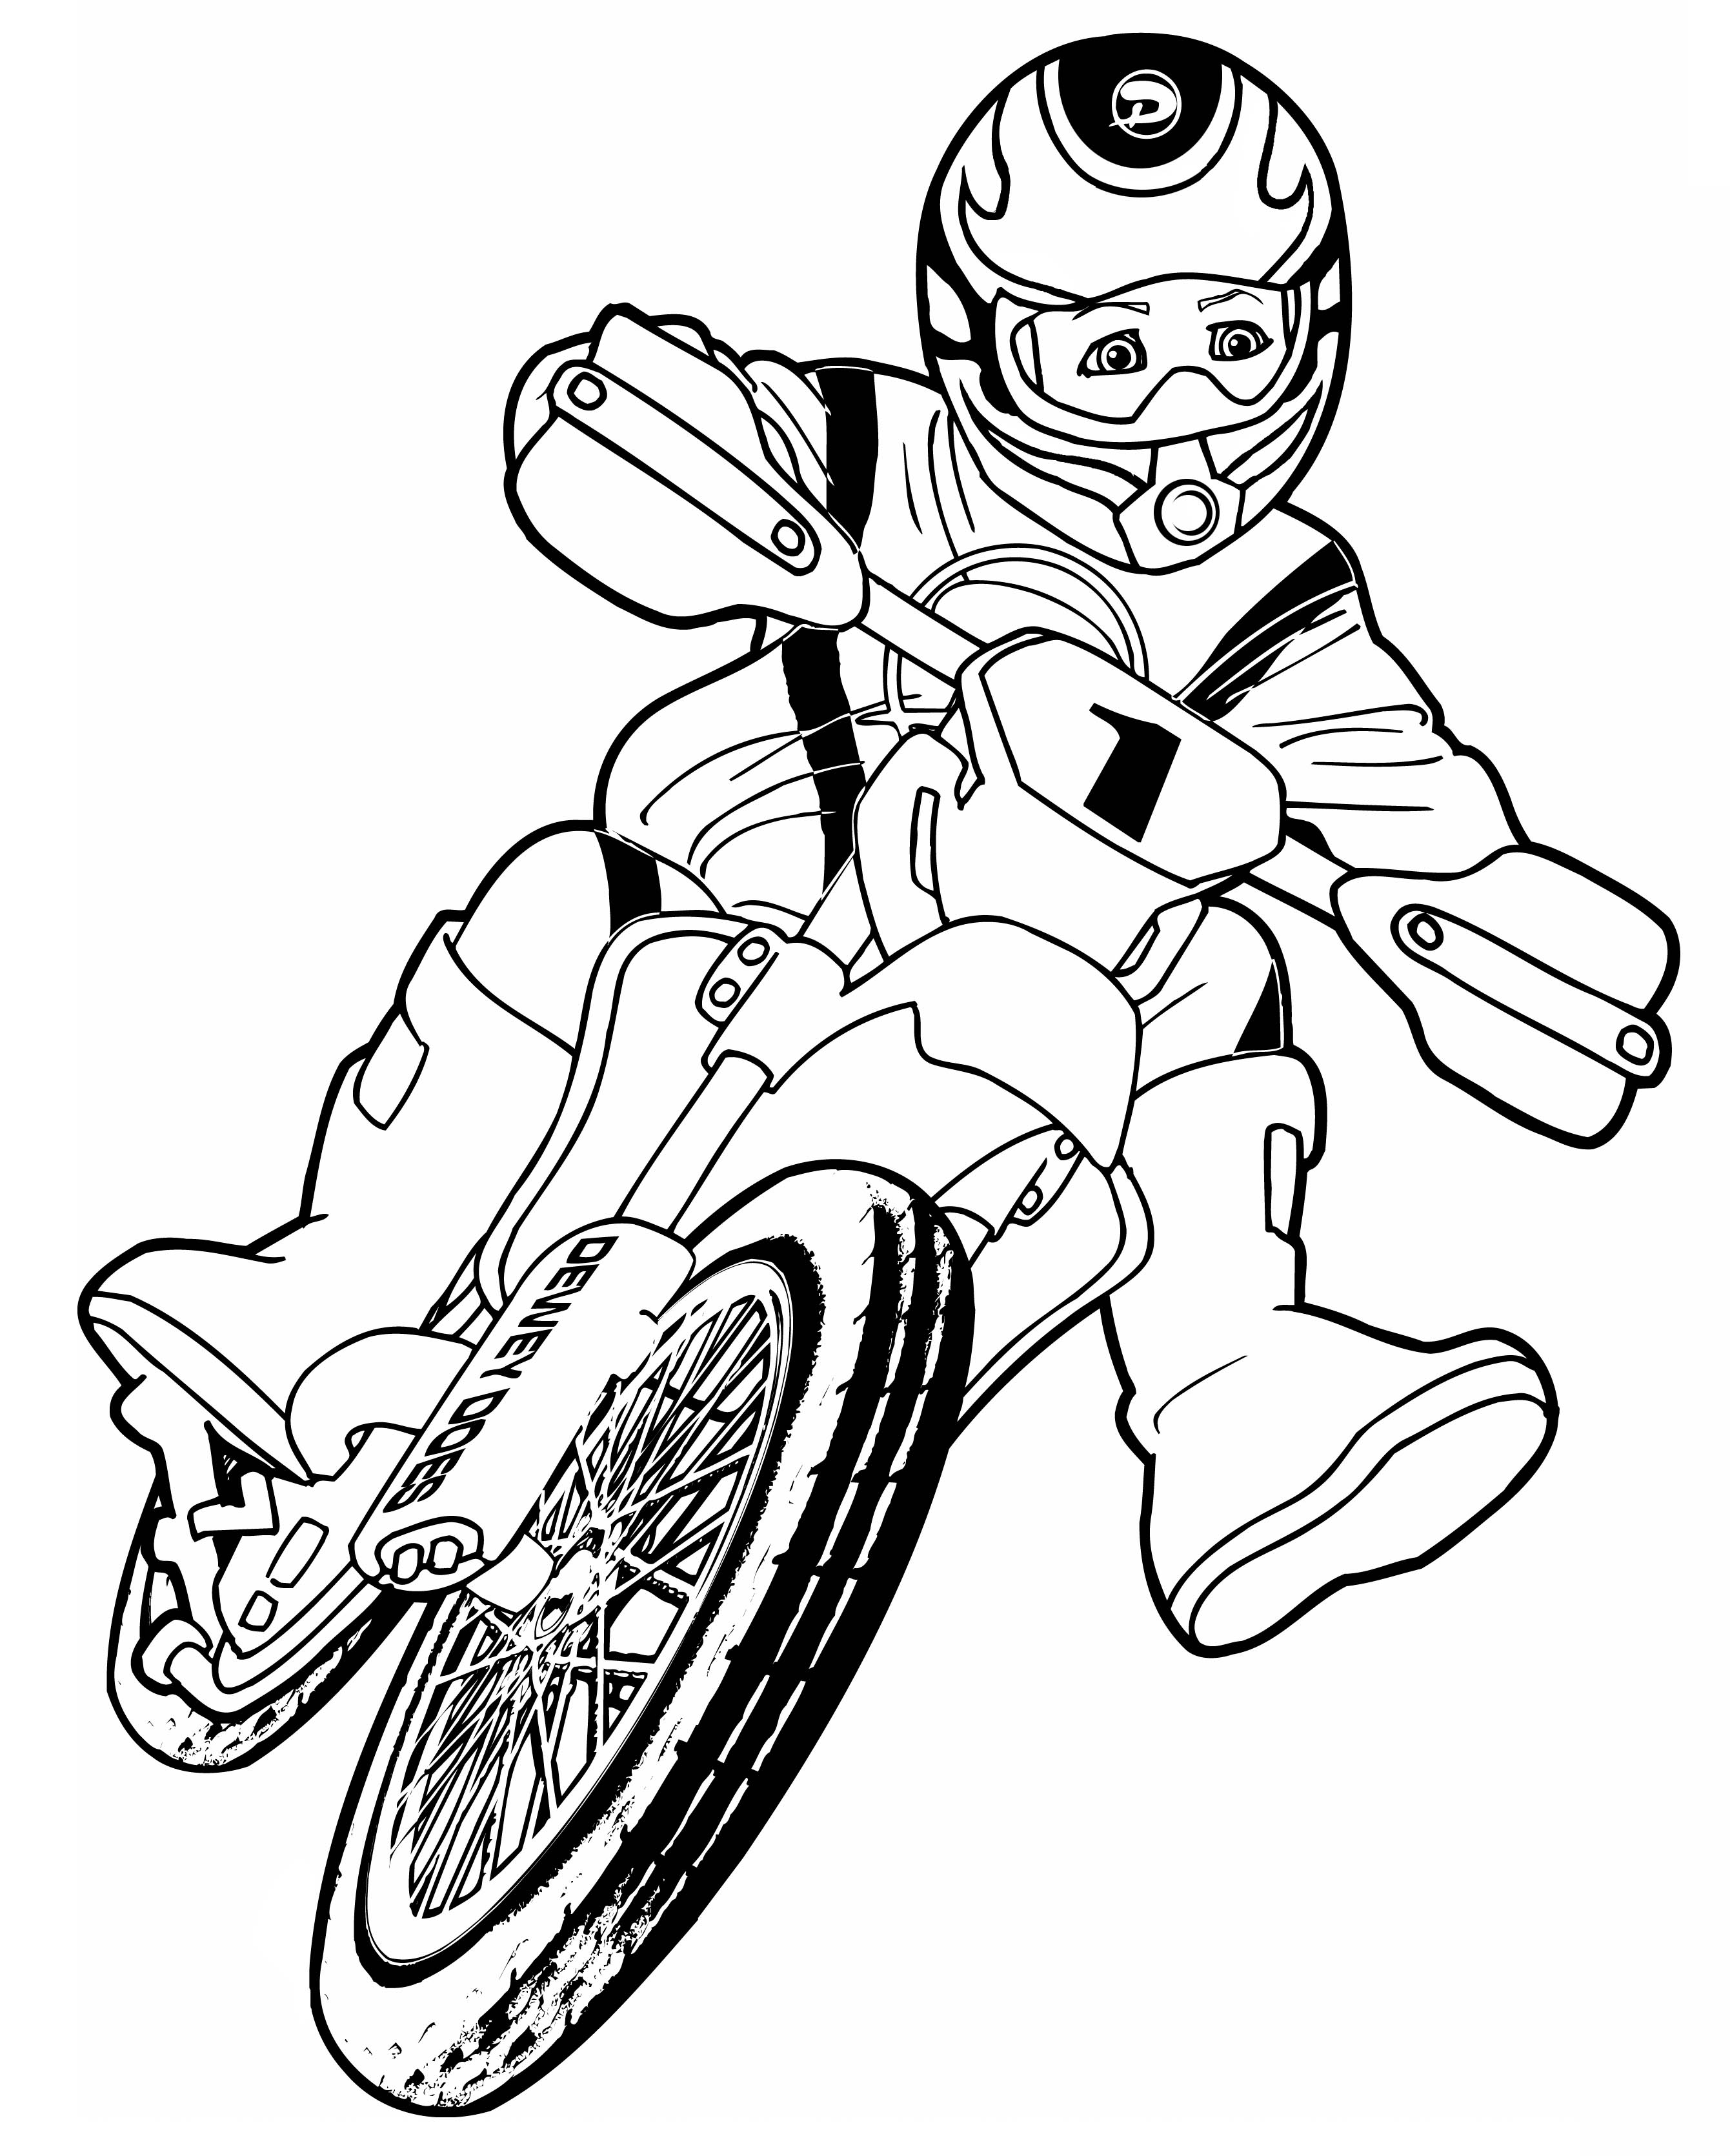 Color printouts | coloring pages for adults,coloring pages for ...